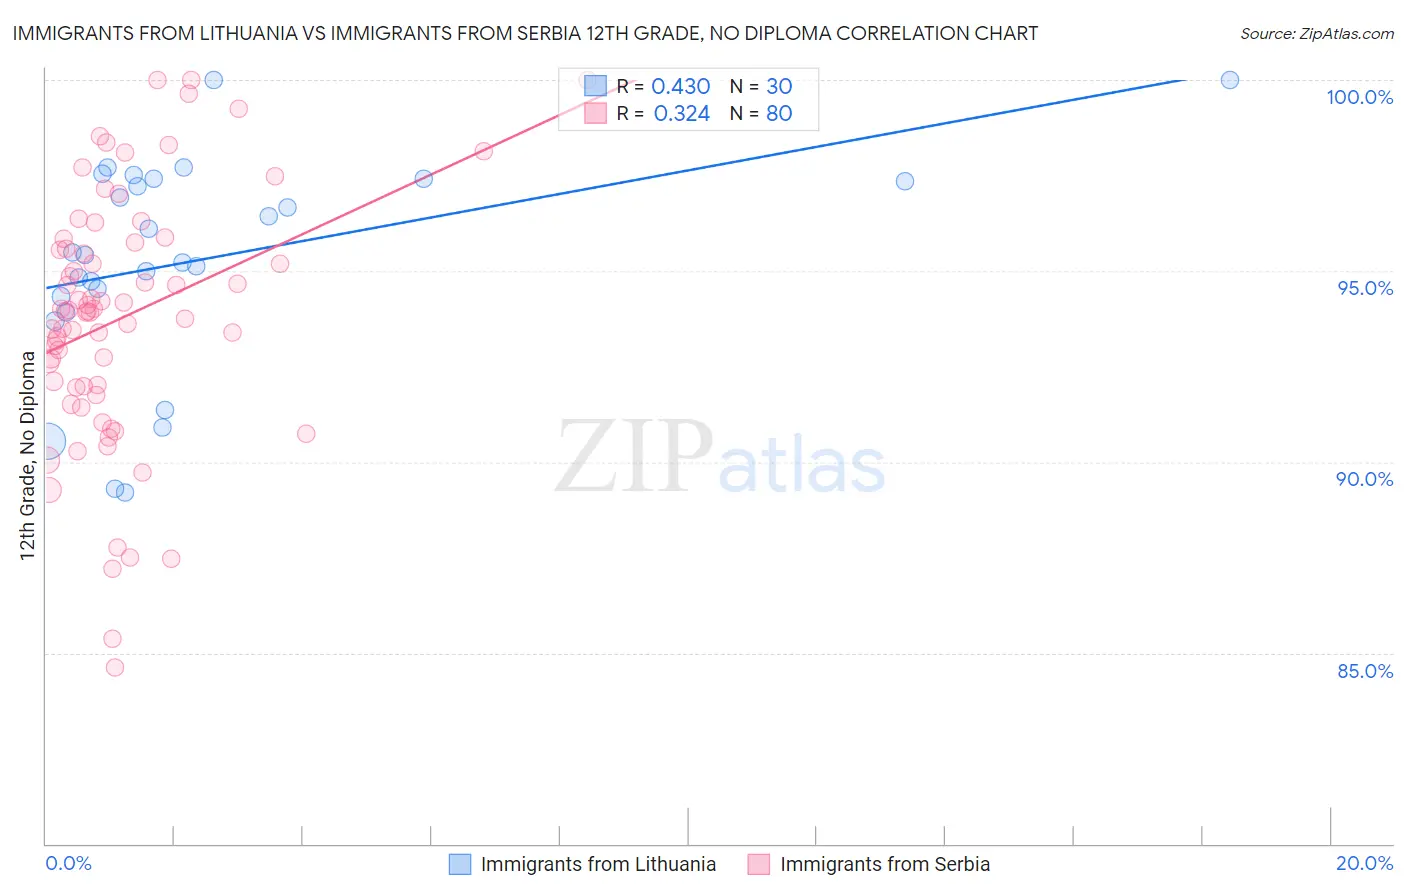 Immigrants from Lithuania vs Immigrants from Serbia 12th Grade, No Diploma